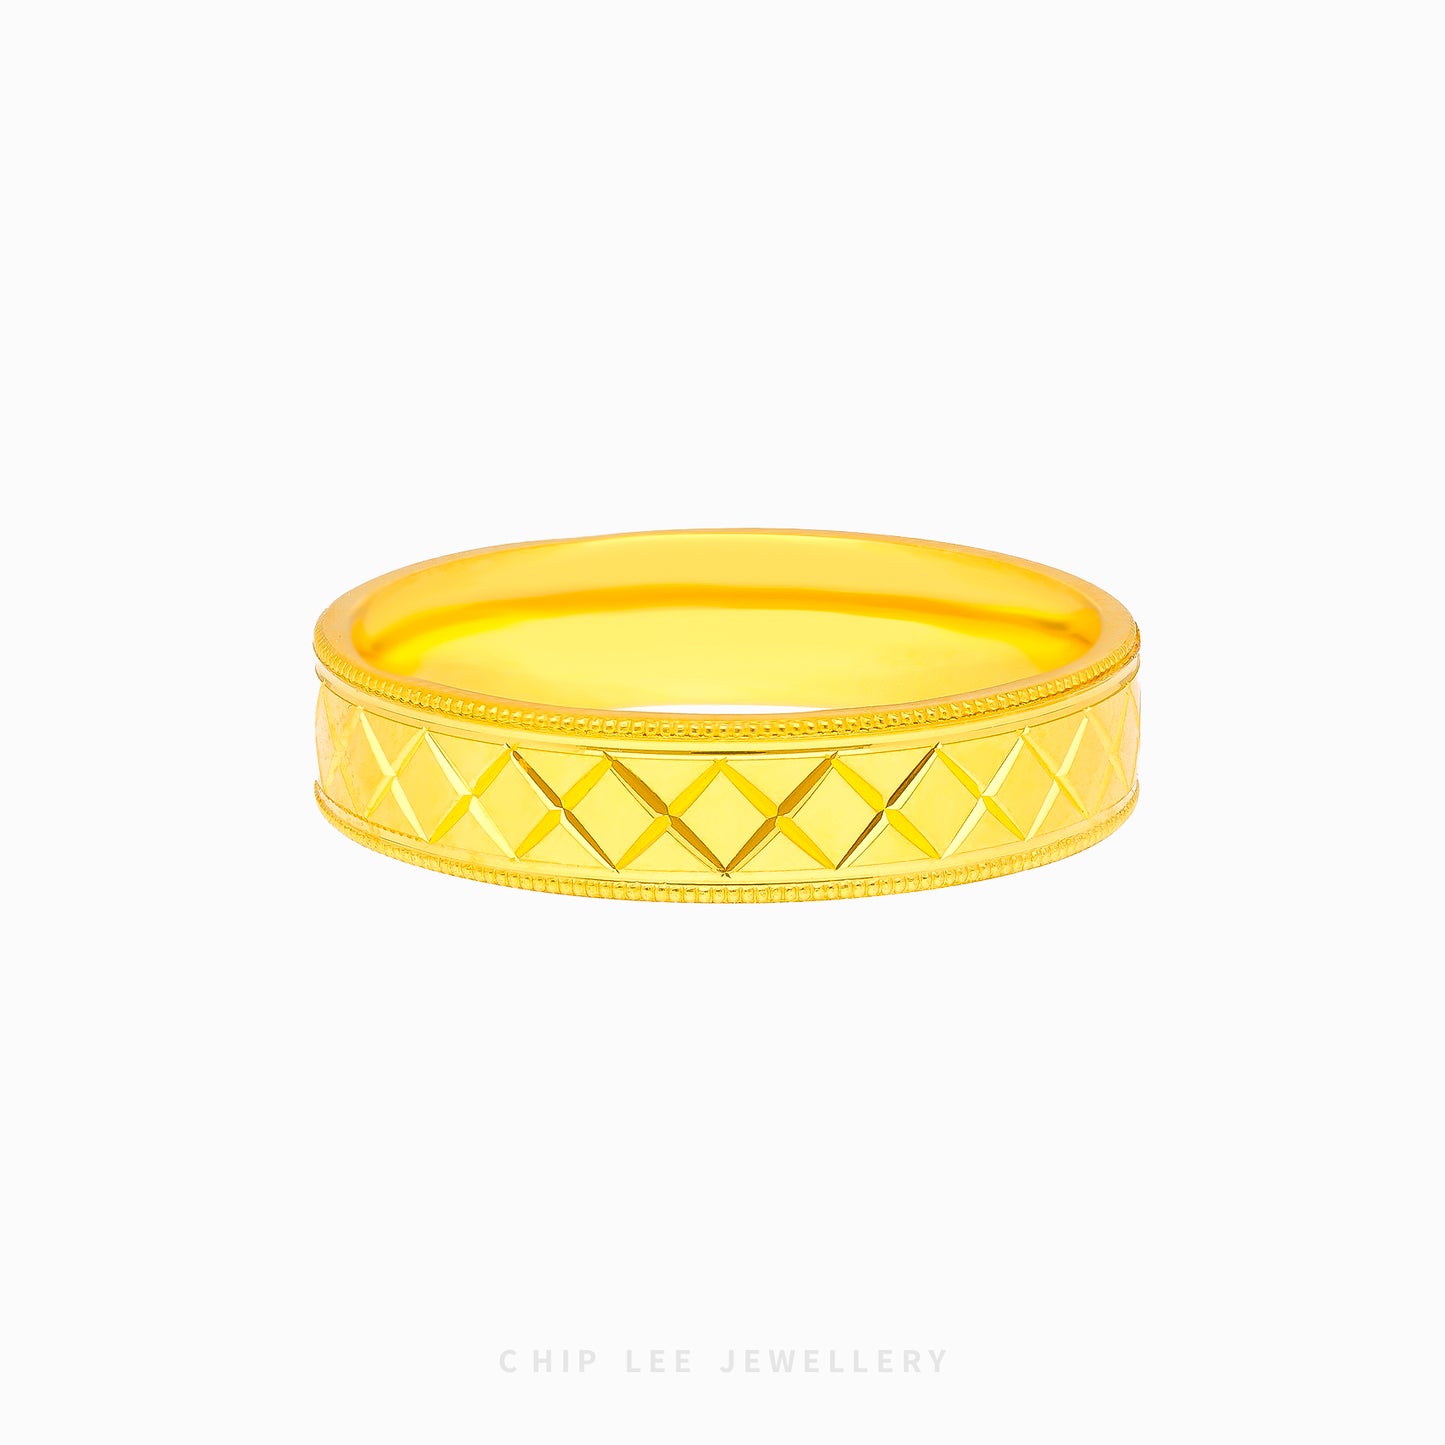 X Hatch Carved ring - Chip Lee Jewellery